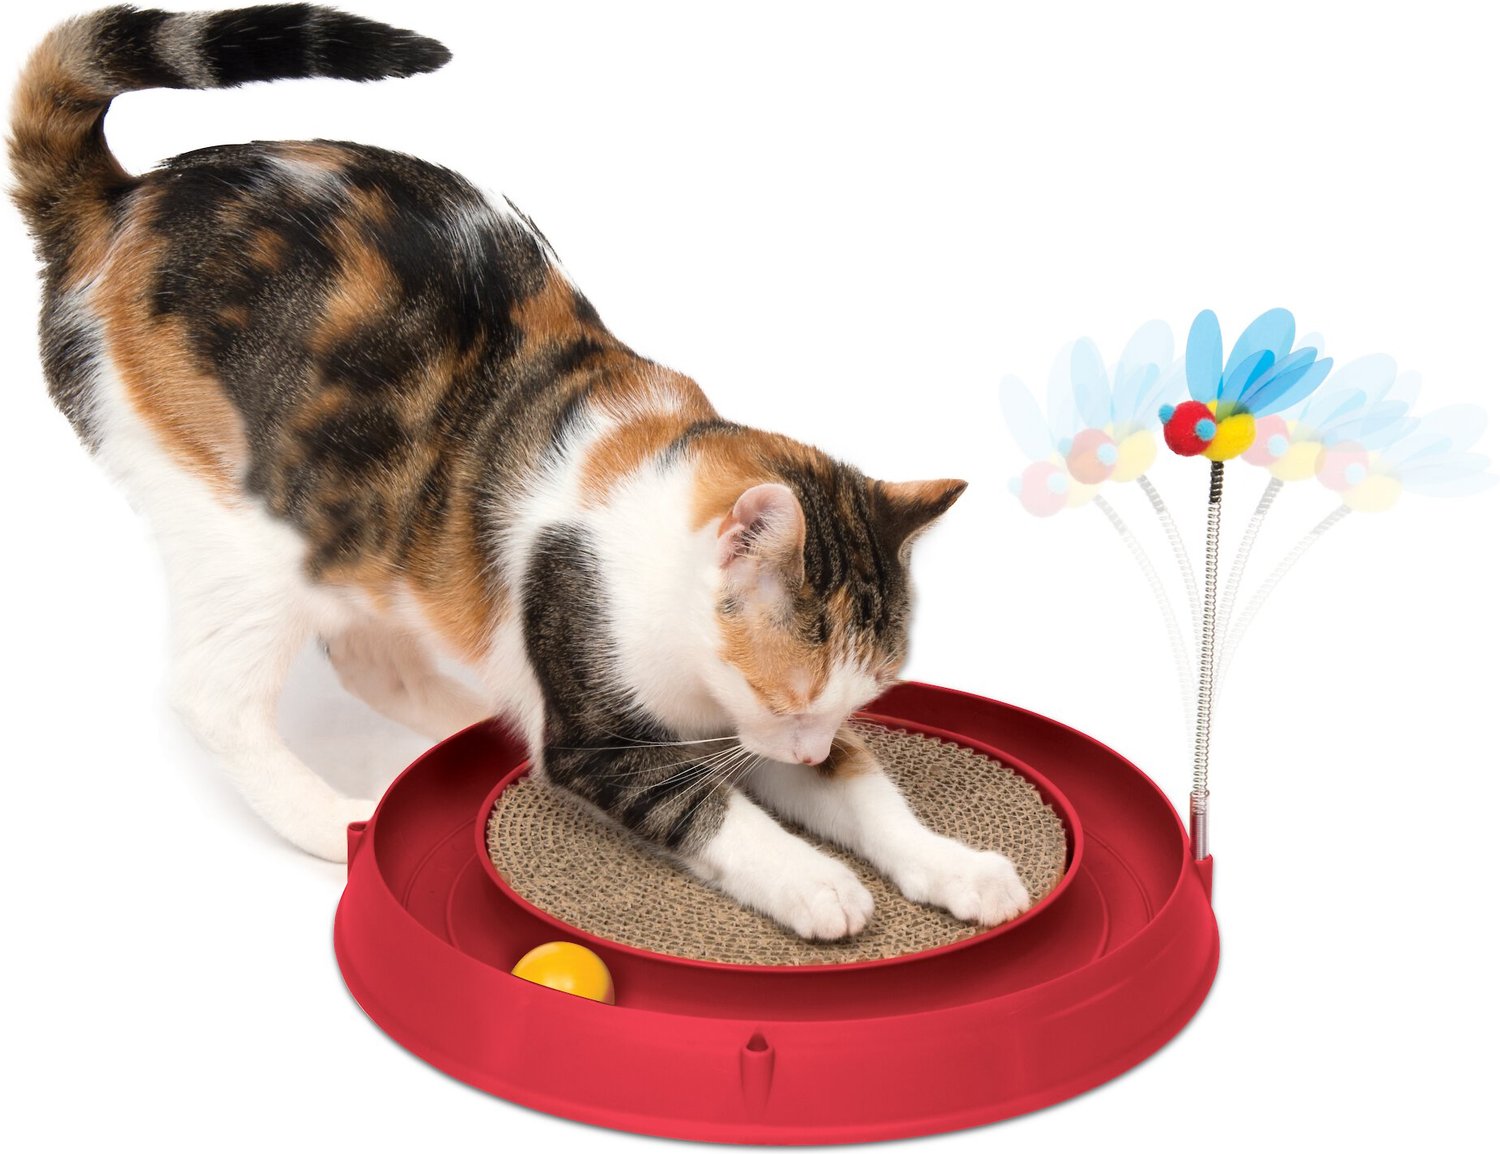 round cat toy with ball